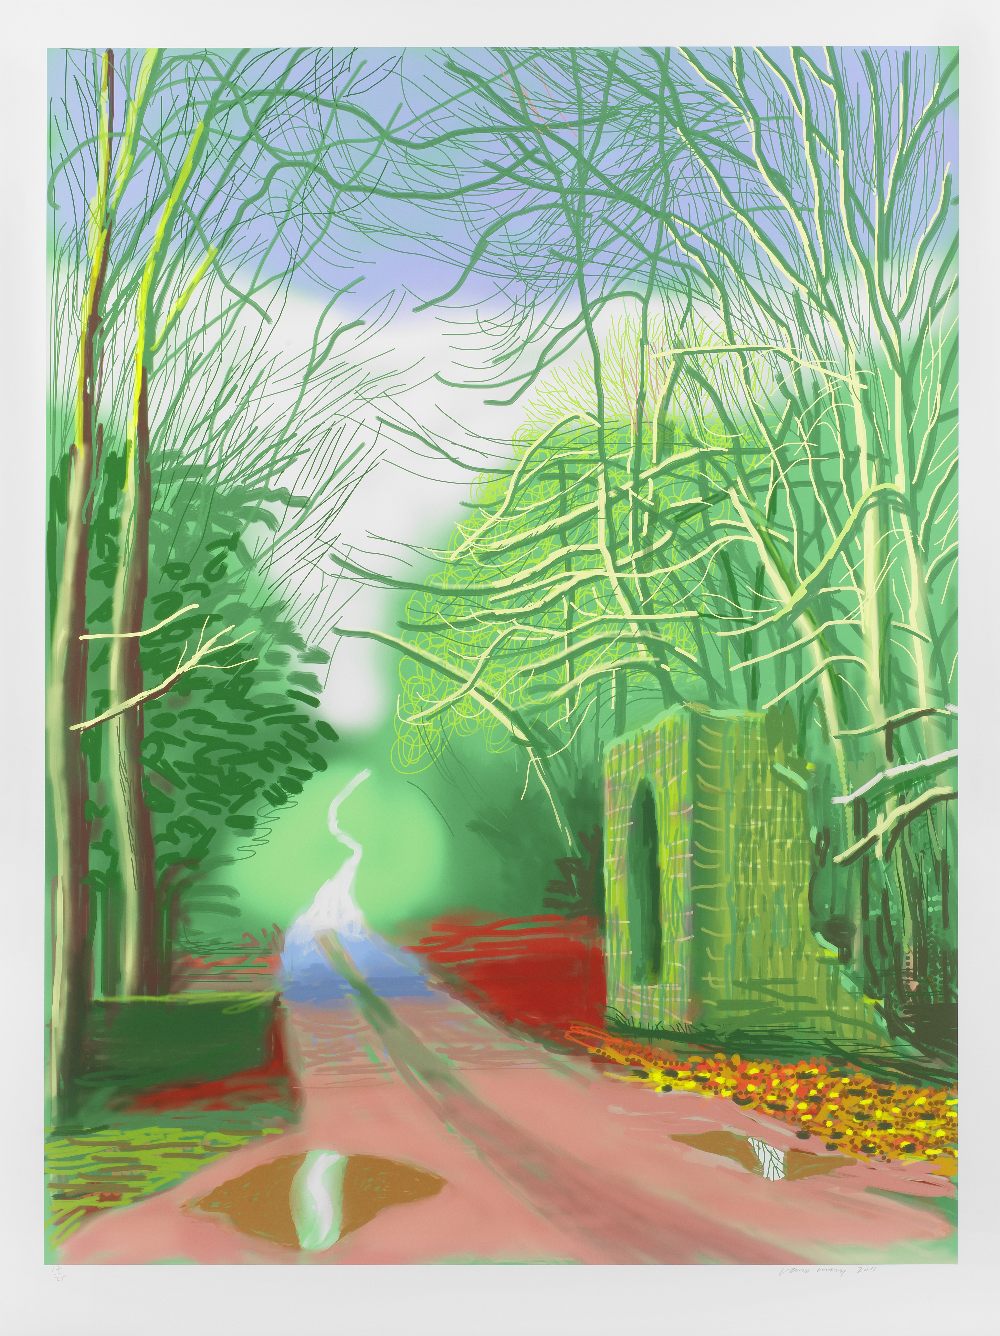 David Hockney R.A. (British, born 1937) The Arrival of Spring in Woldgate, East Yorkshire in 201...